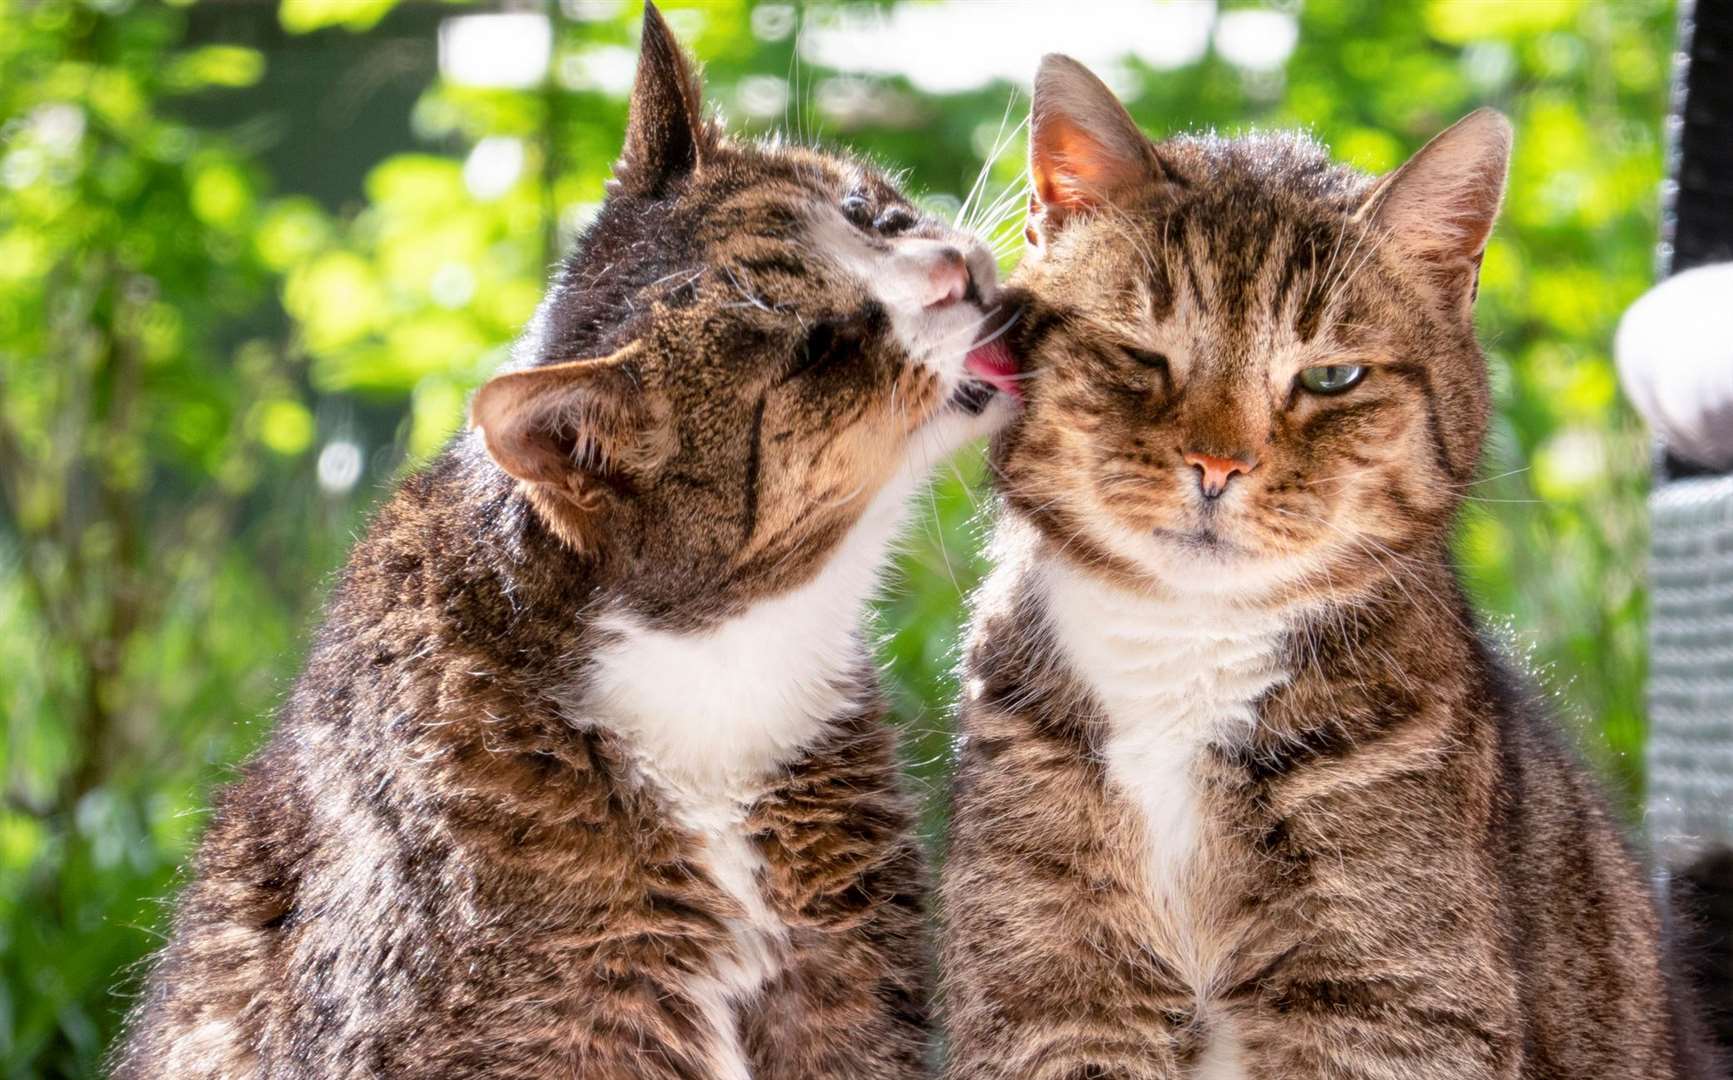 The initial infection is spread between cats. Image: iStock.